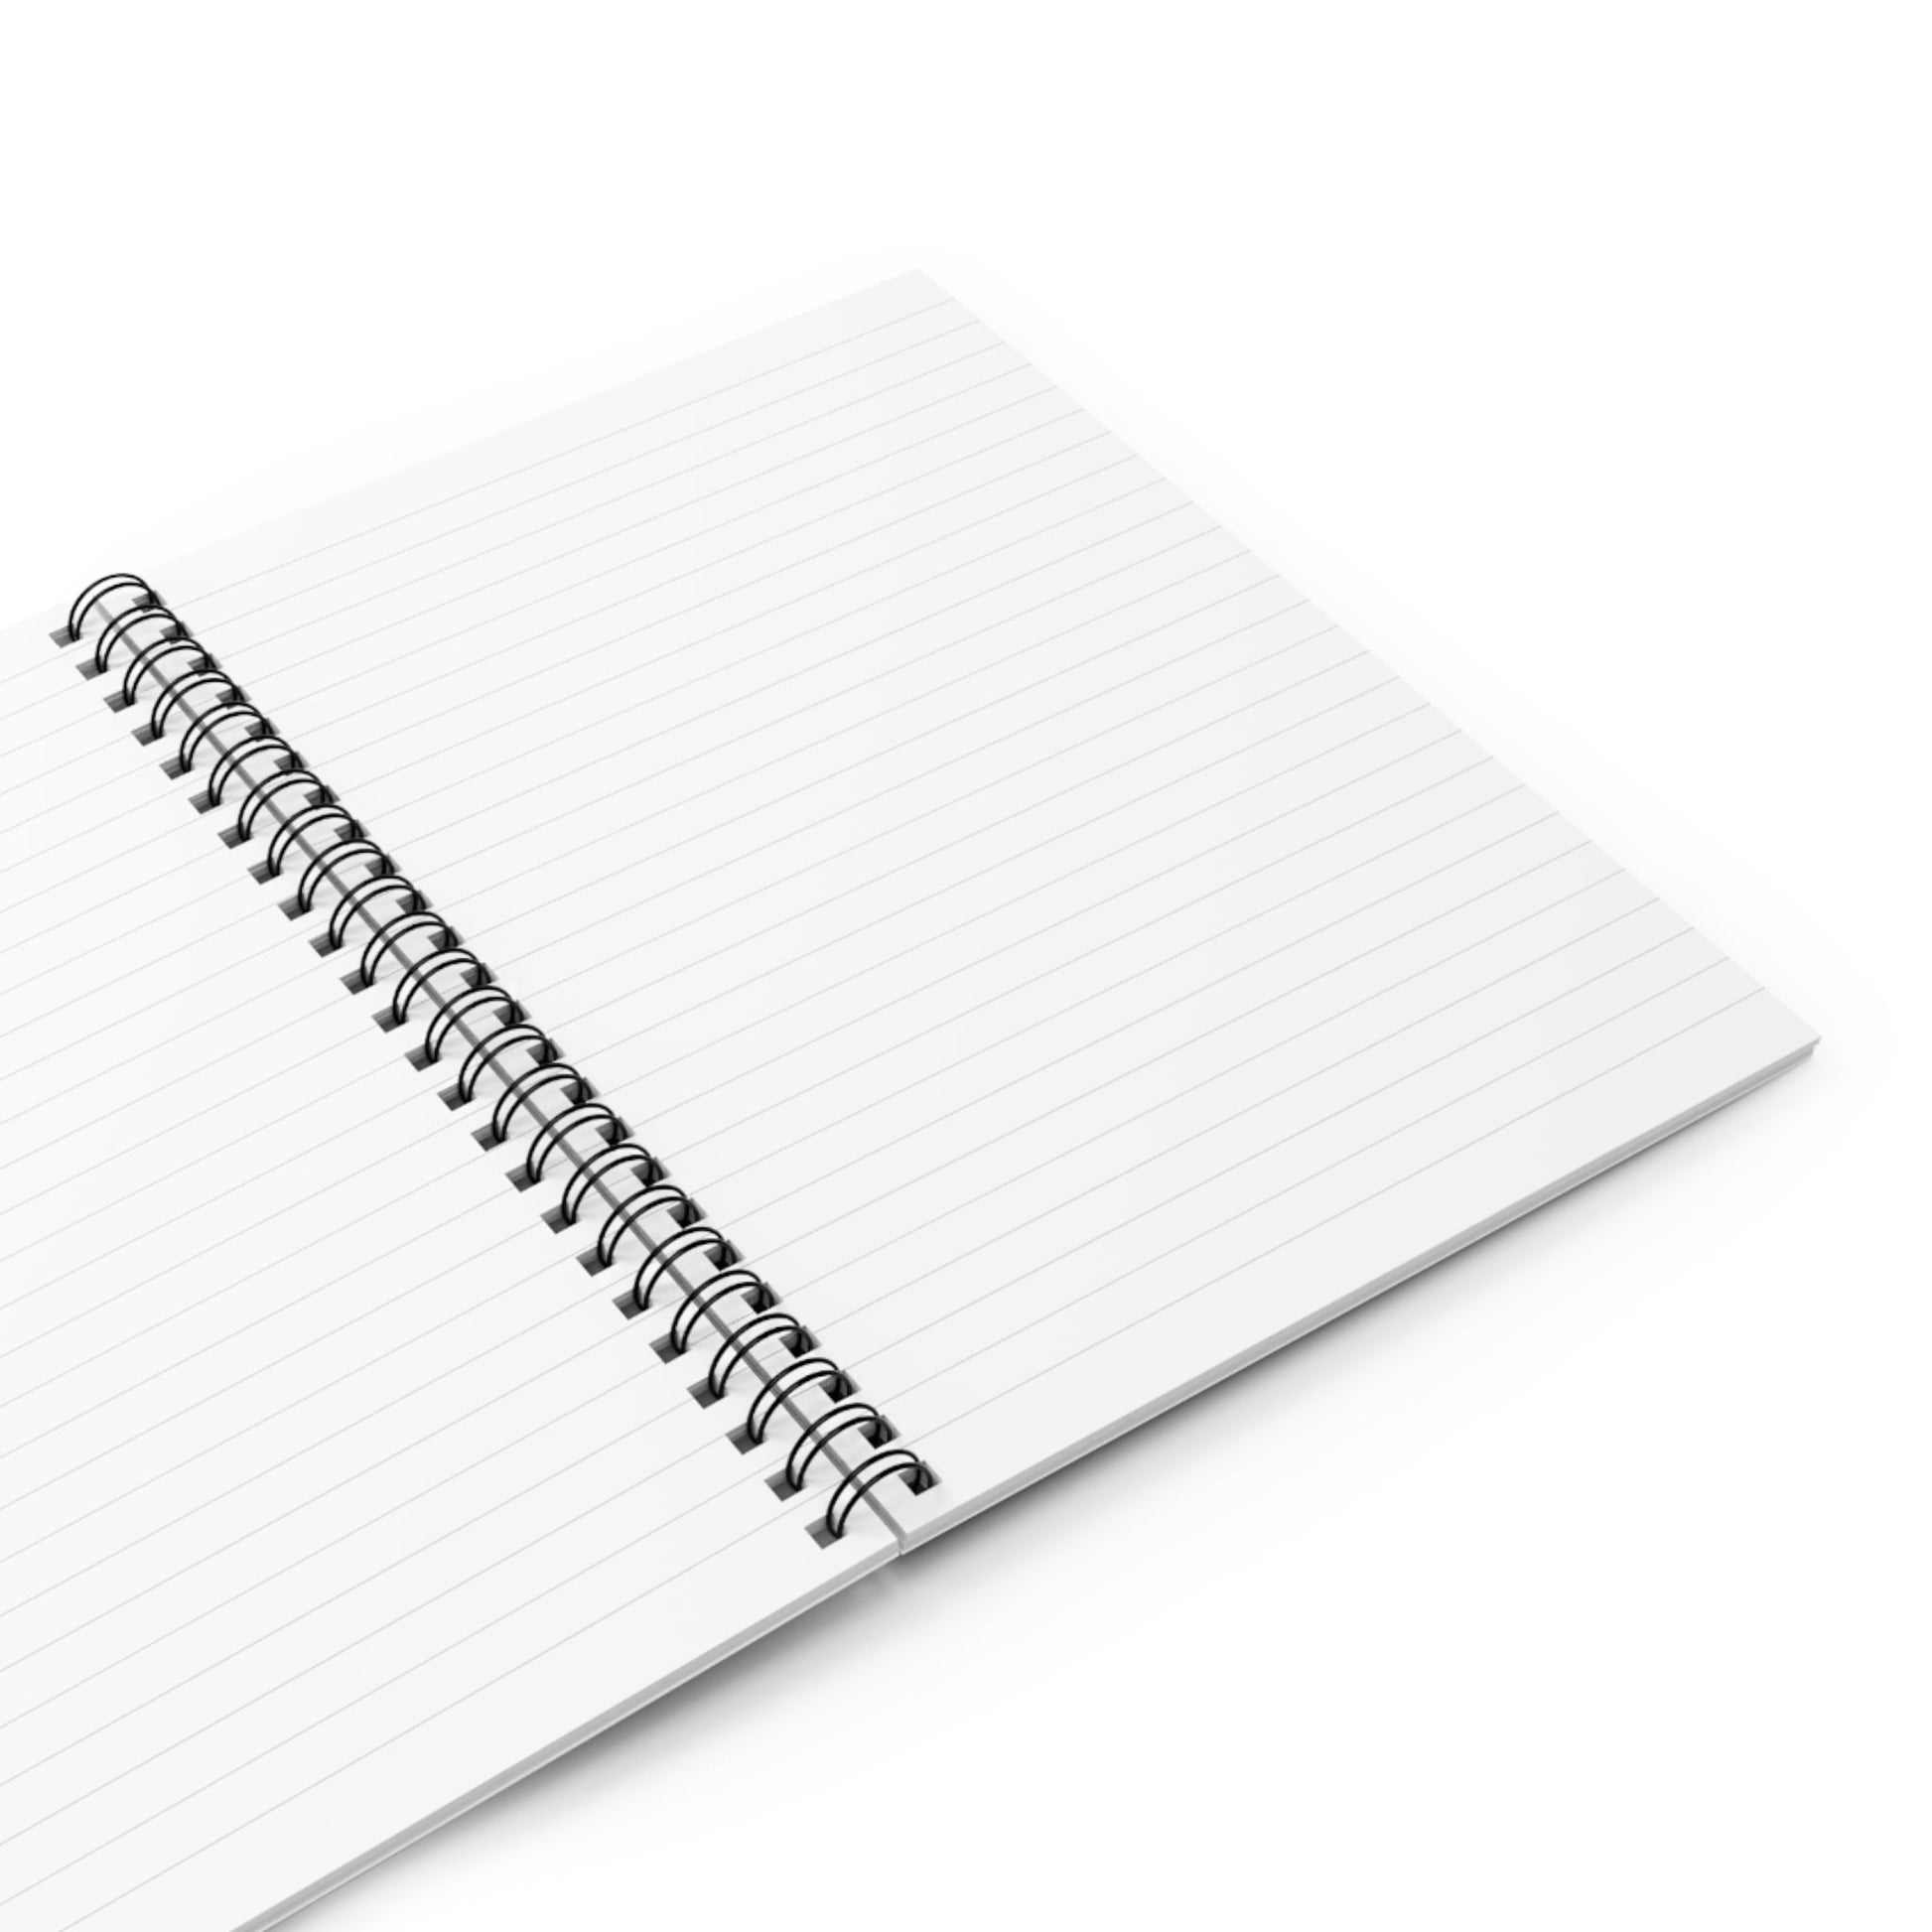 Spiral Notebook with Mountains Cover Opened with Blank White College Ruled Pages